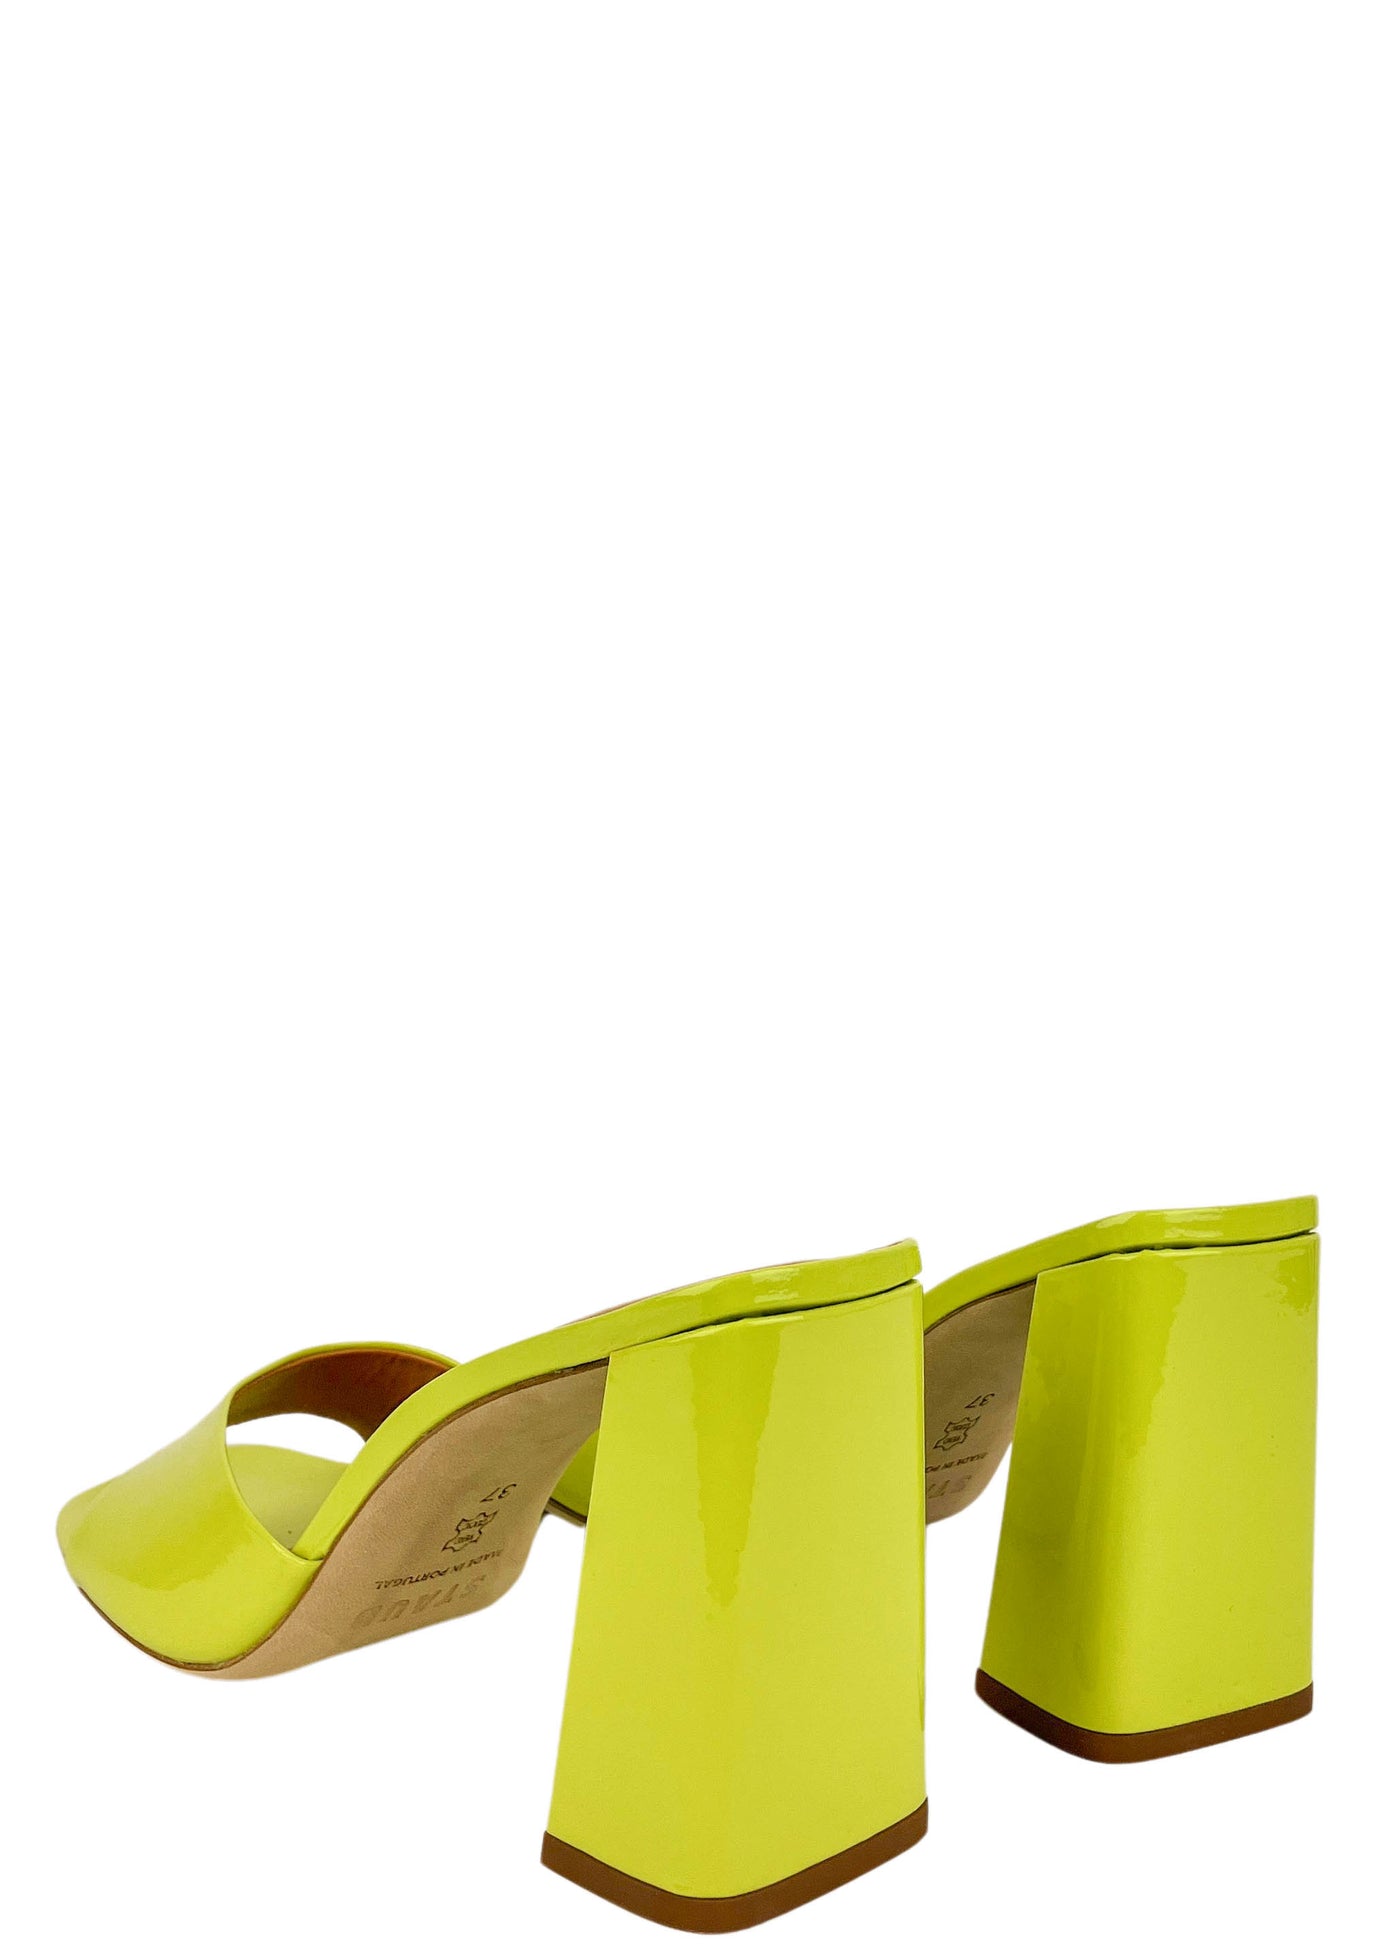 Staud Sloane Heels in Citron Patent Leather - Discounts on Paul Andrew at UAL